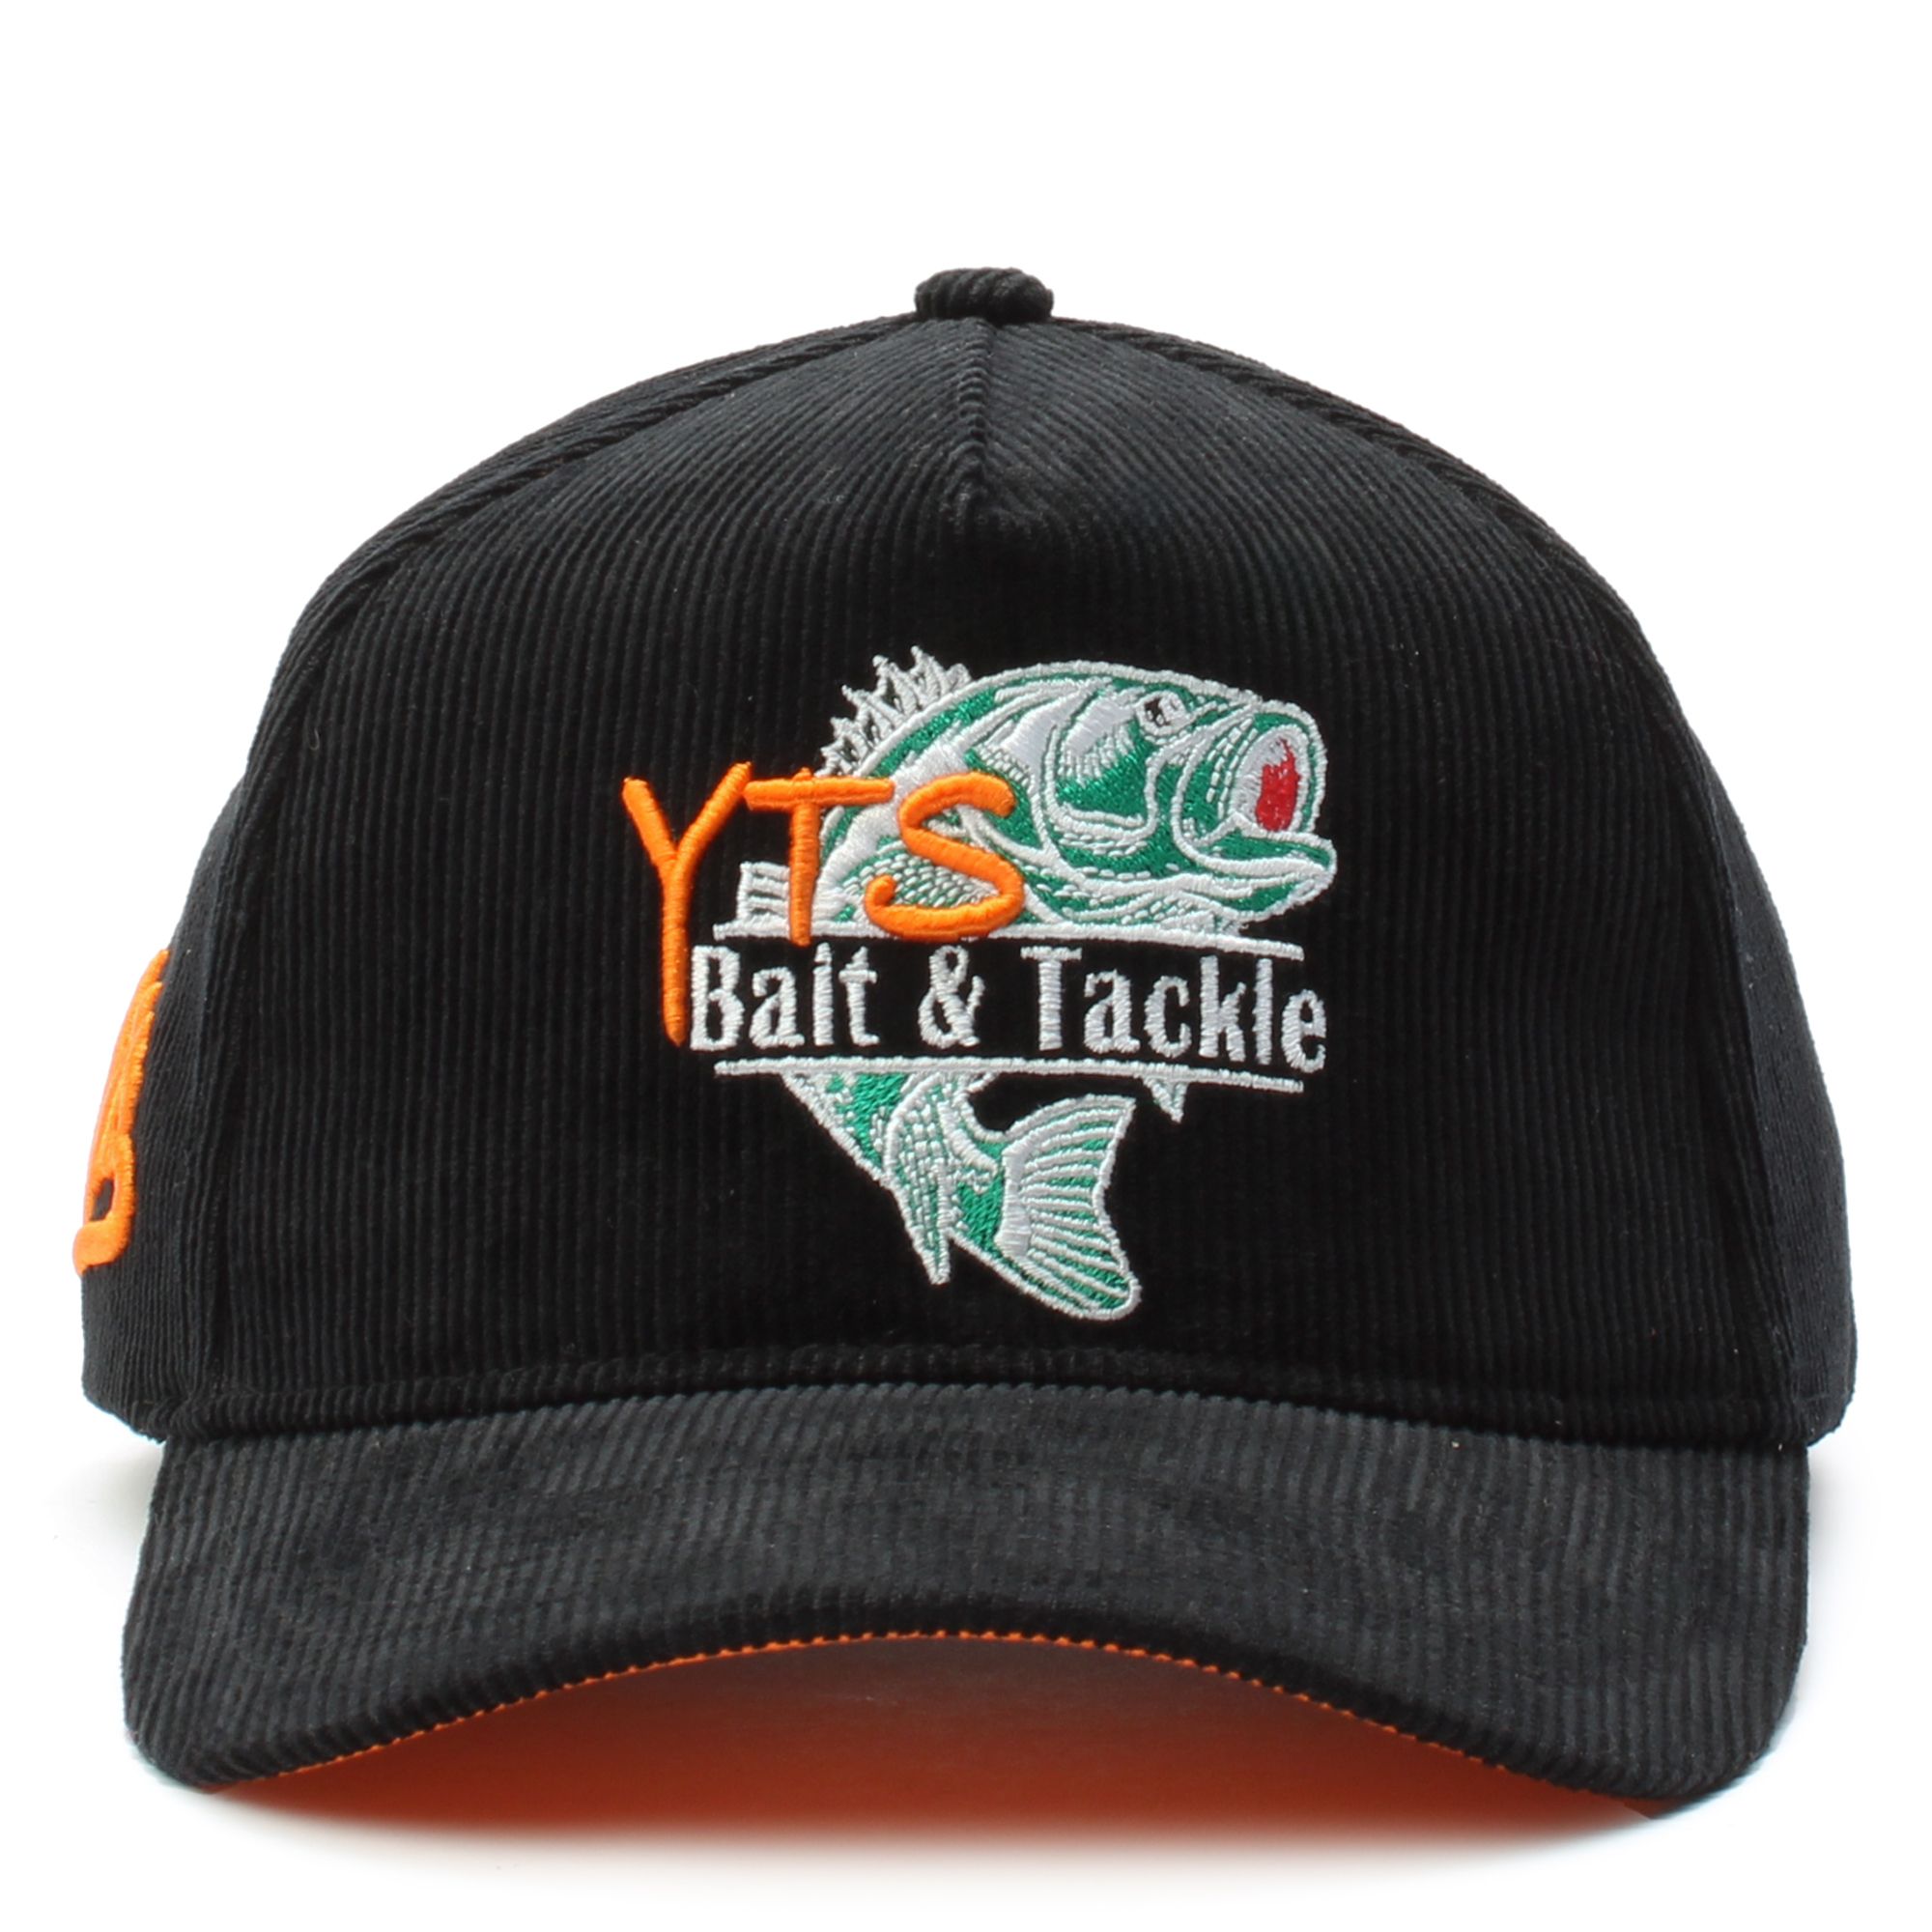 BAIT AND TACKLE CORDUROY SNAPBACK YTS892-BLK